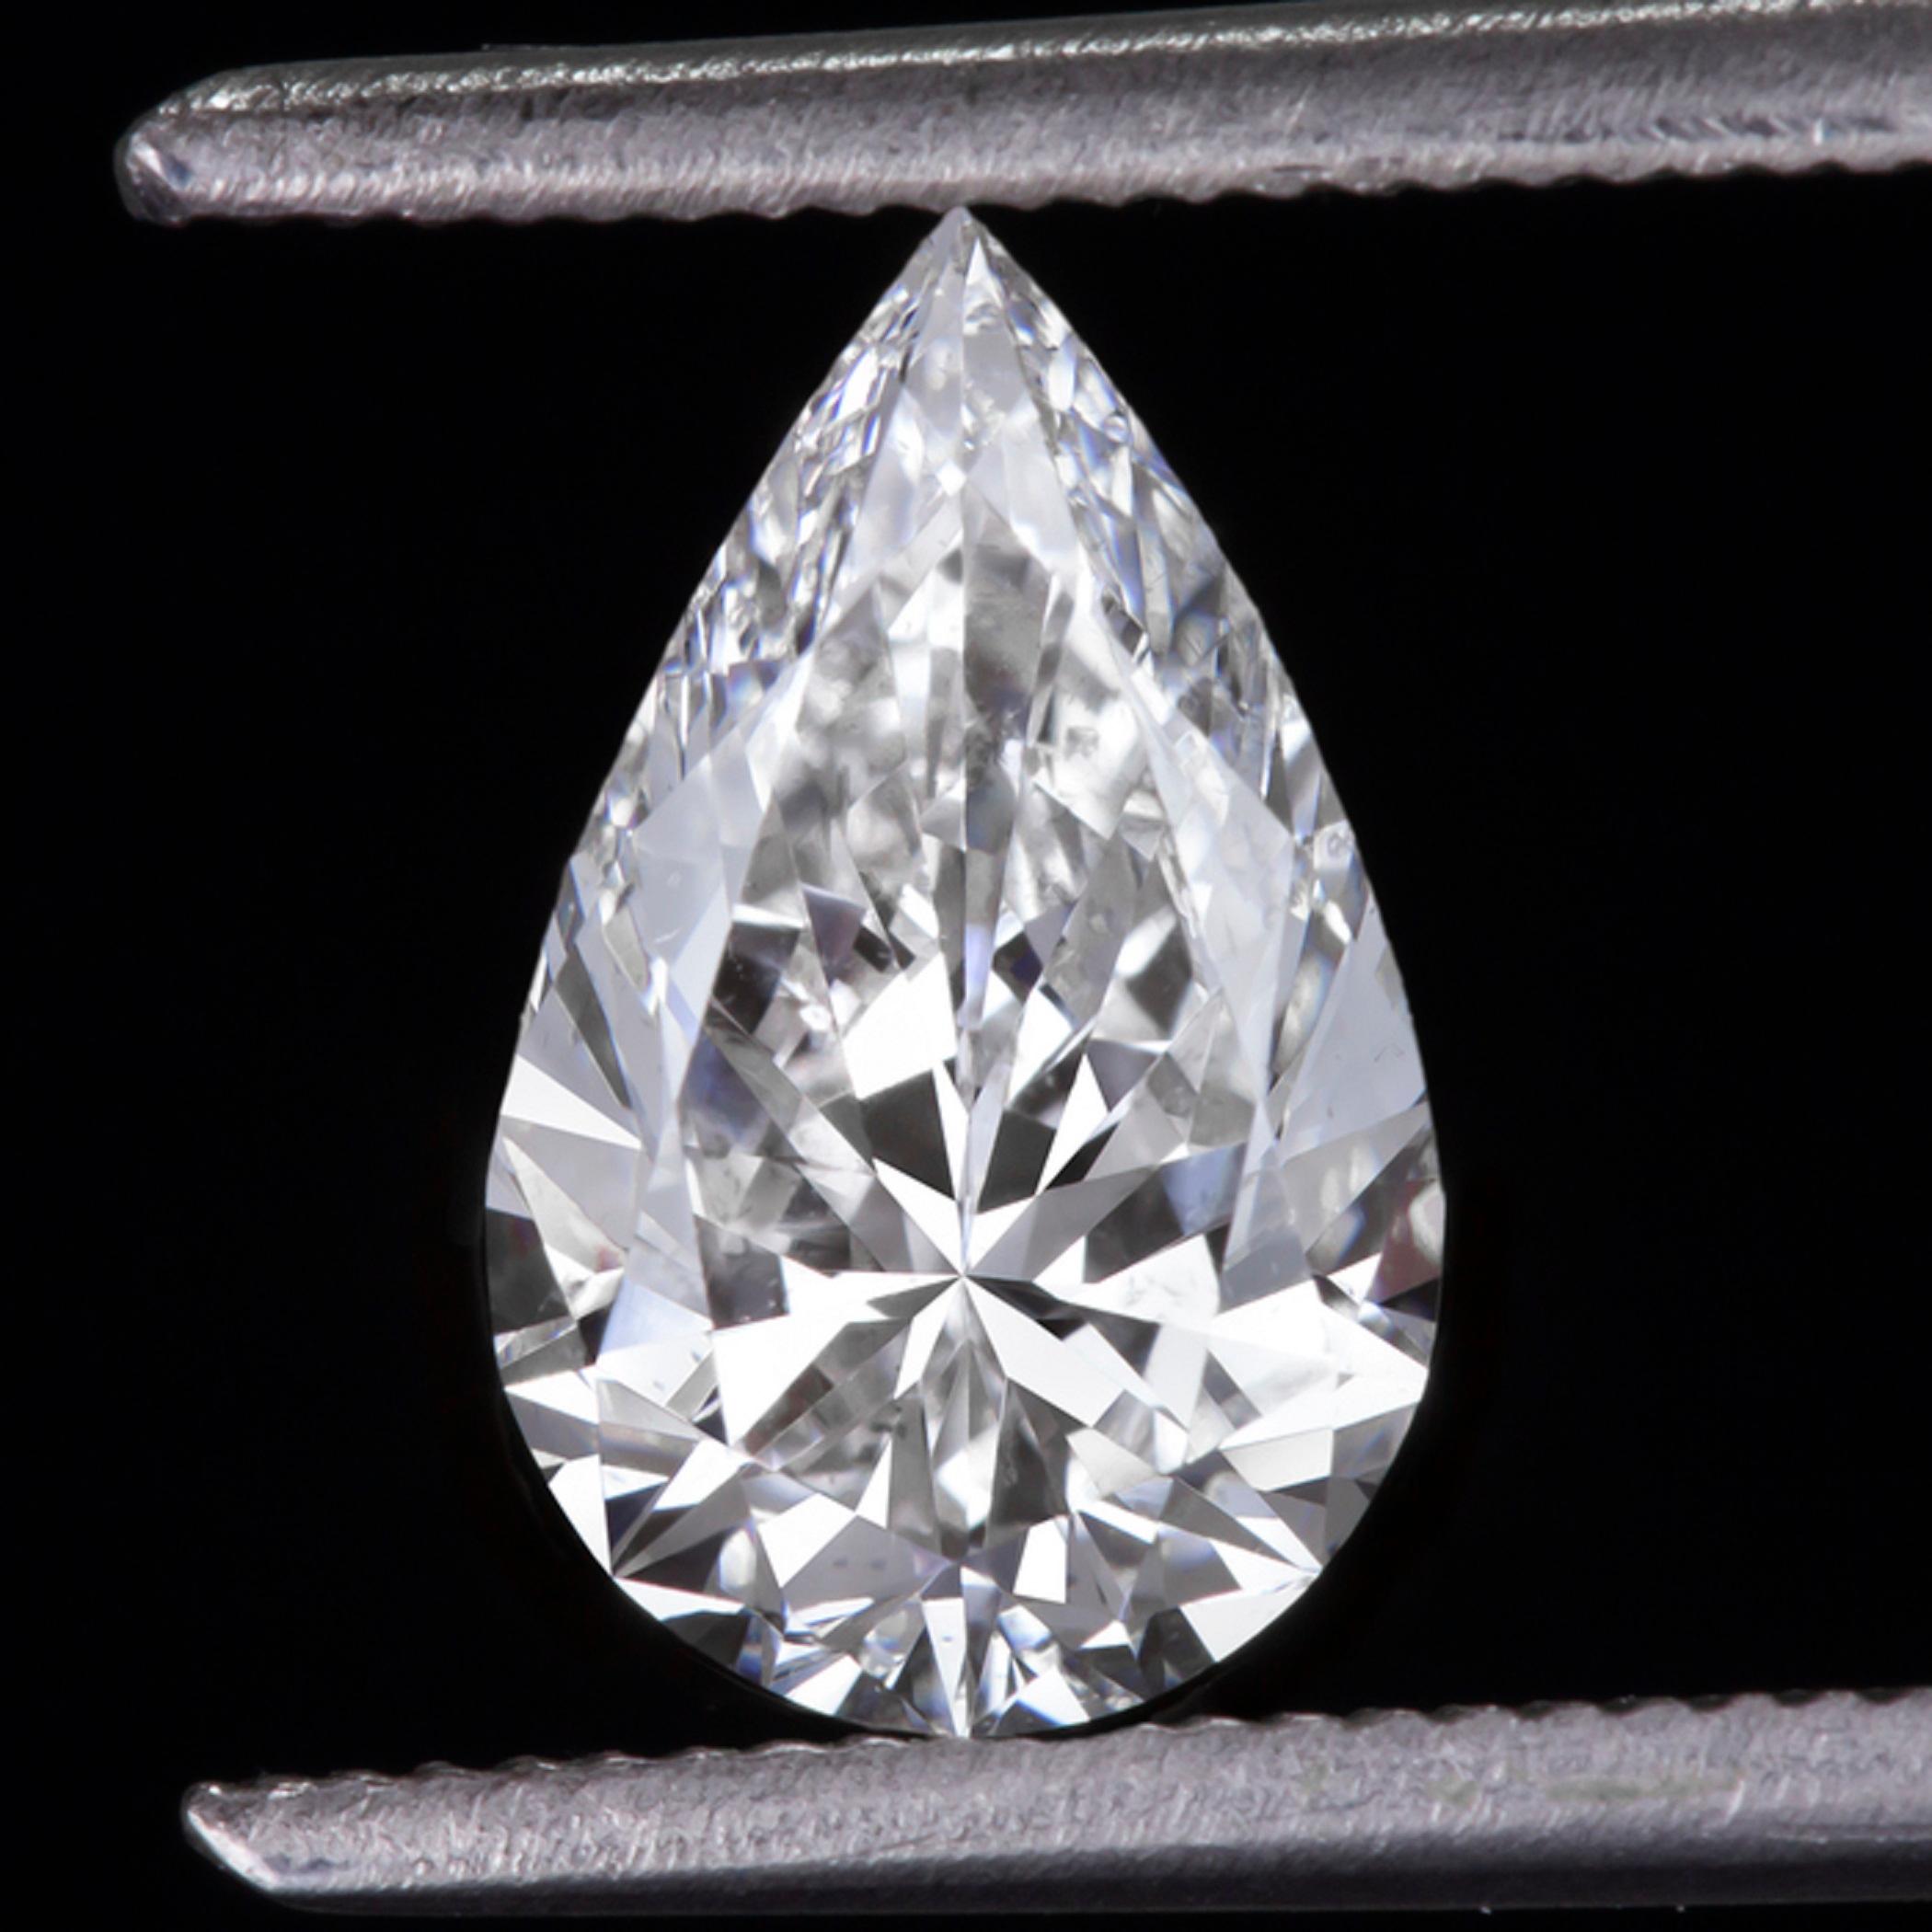 1 Carat Pear Cut Loose Diamond
Color: F
Clarity: SI2 
Cut: Pear

The stone is sold loose, but on request we can create a magnificent mounting according to your tastes.
The production time of the setting is about 2 weeks.